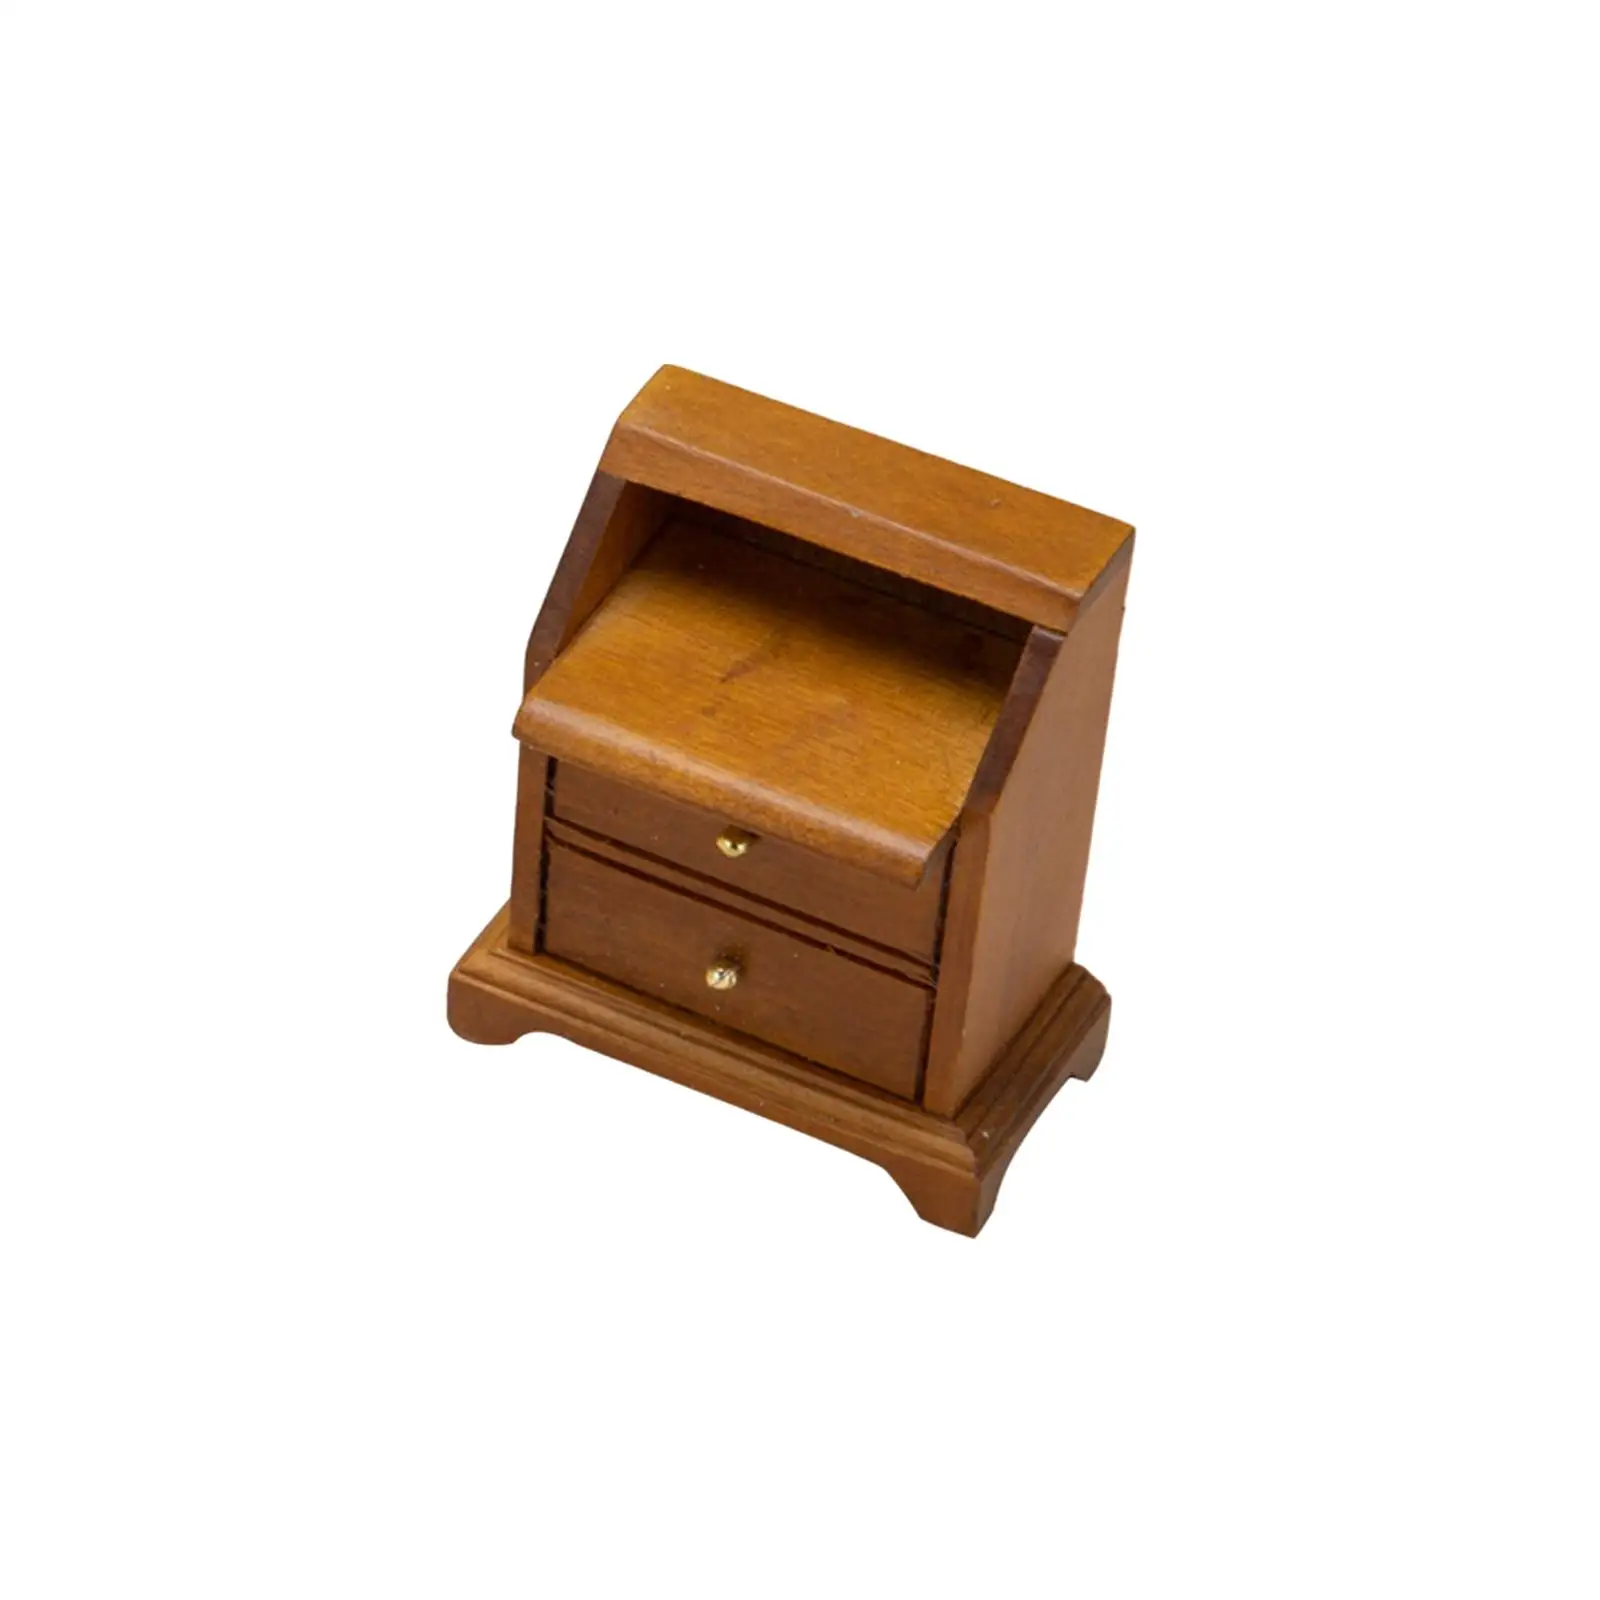 1/12 Scale Dollhouse NightStand Storage Stand Wooden Model 8.7x3.7x15cm Smooth Polishing